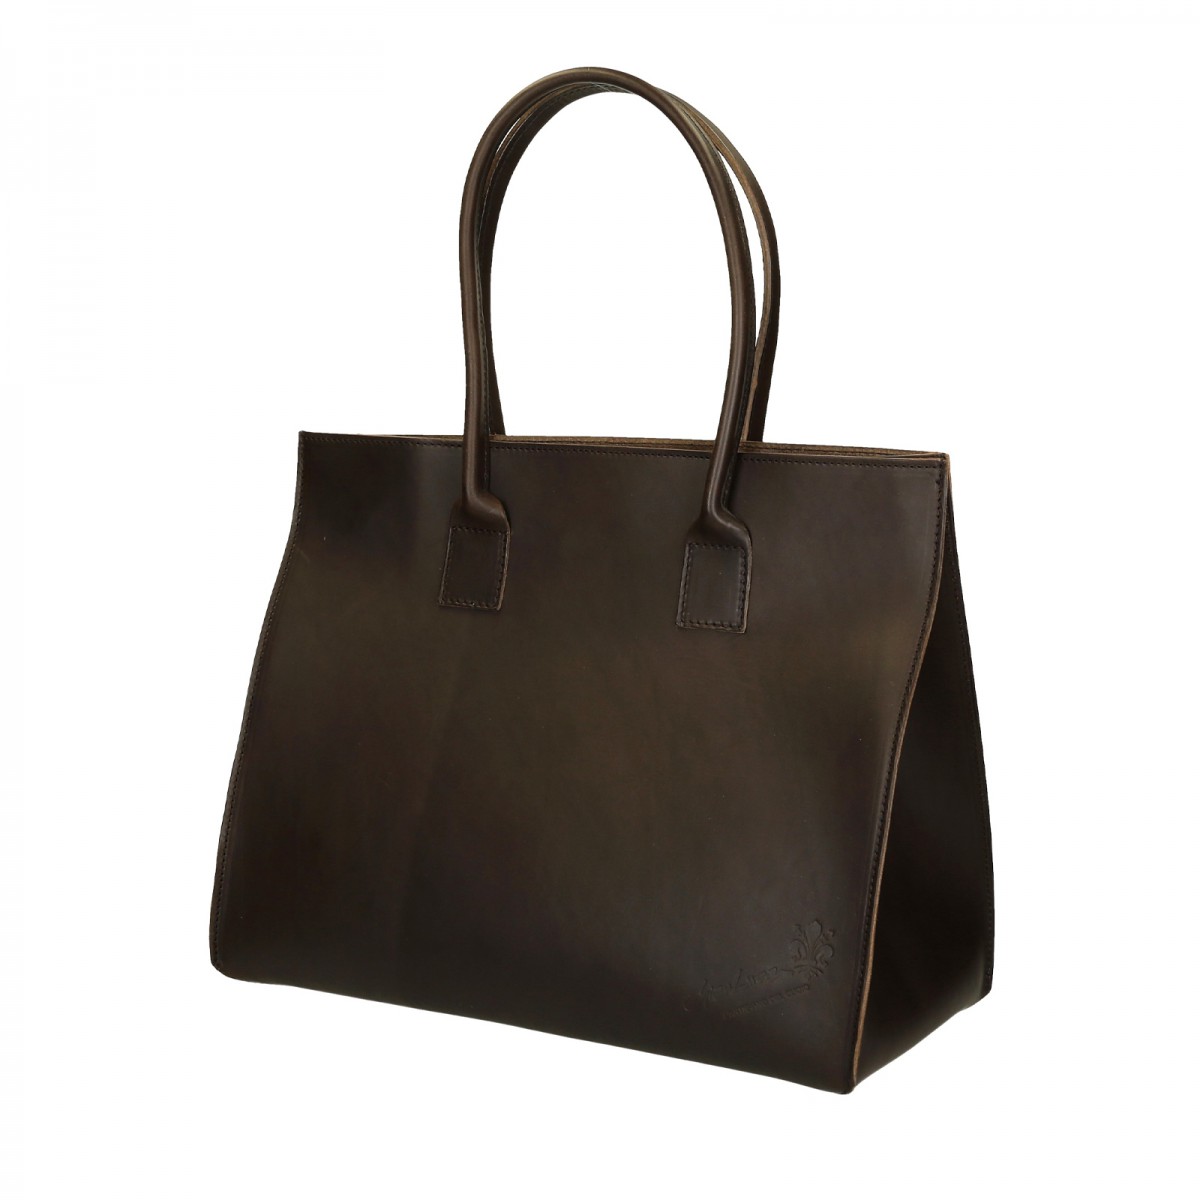 Brown leather tote bag for women Handmade | Gianluca - The leather craftsman